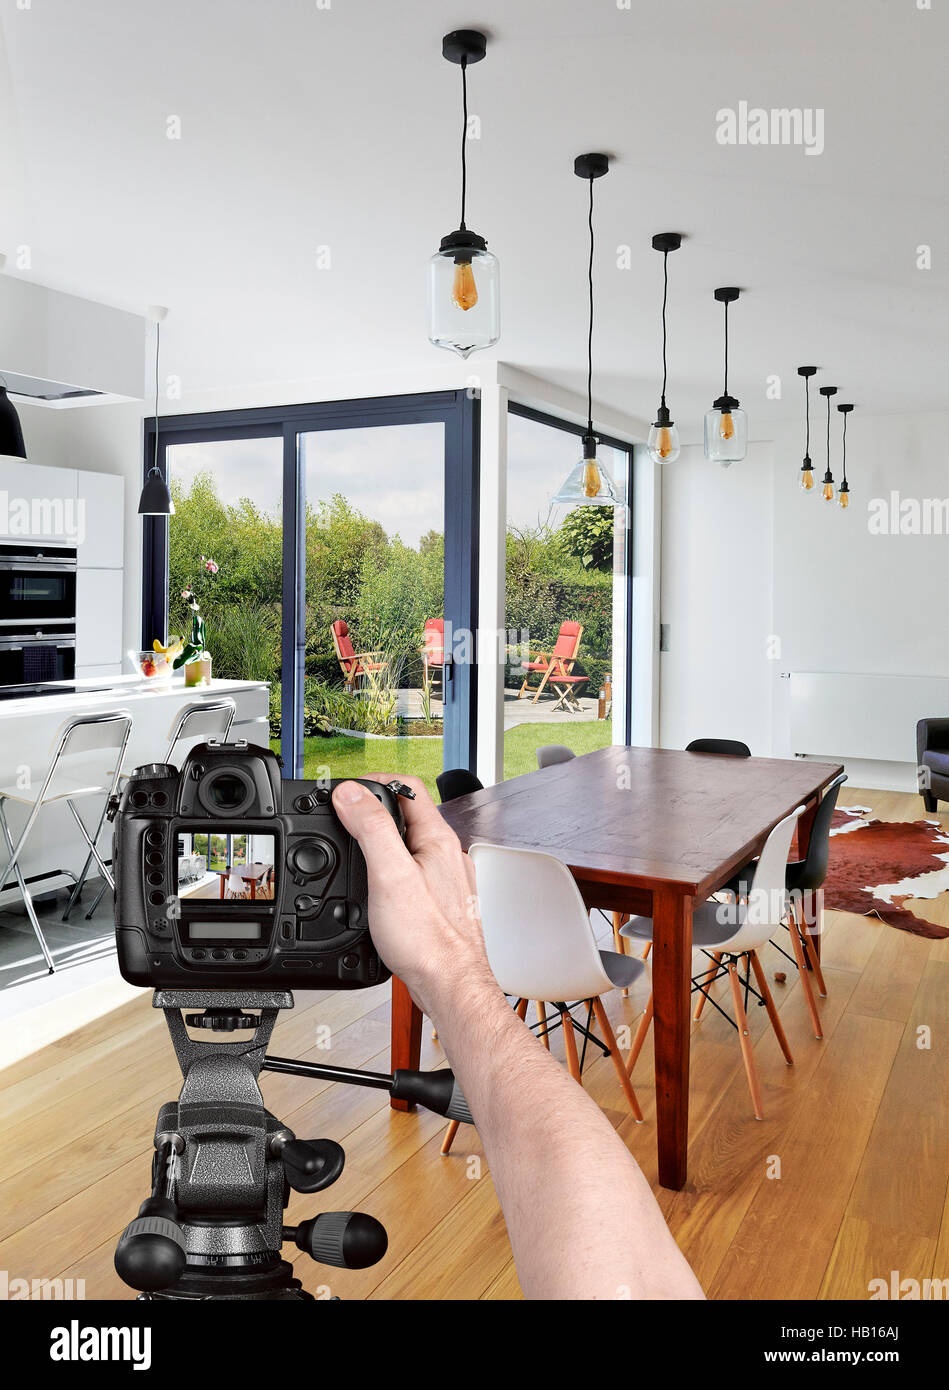 Hands holding a professional camera on tripod taking picture in luxury living room Stock Photo